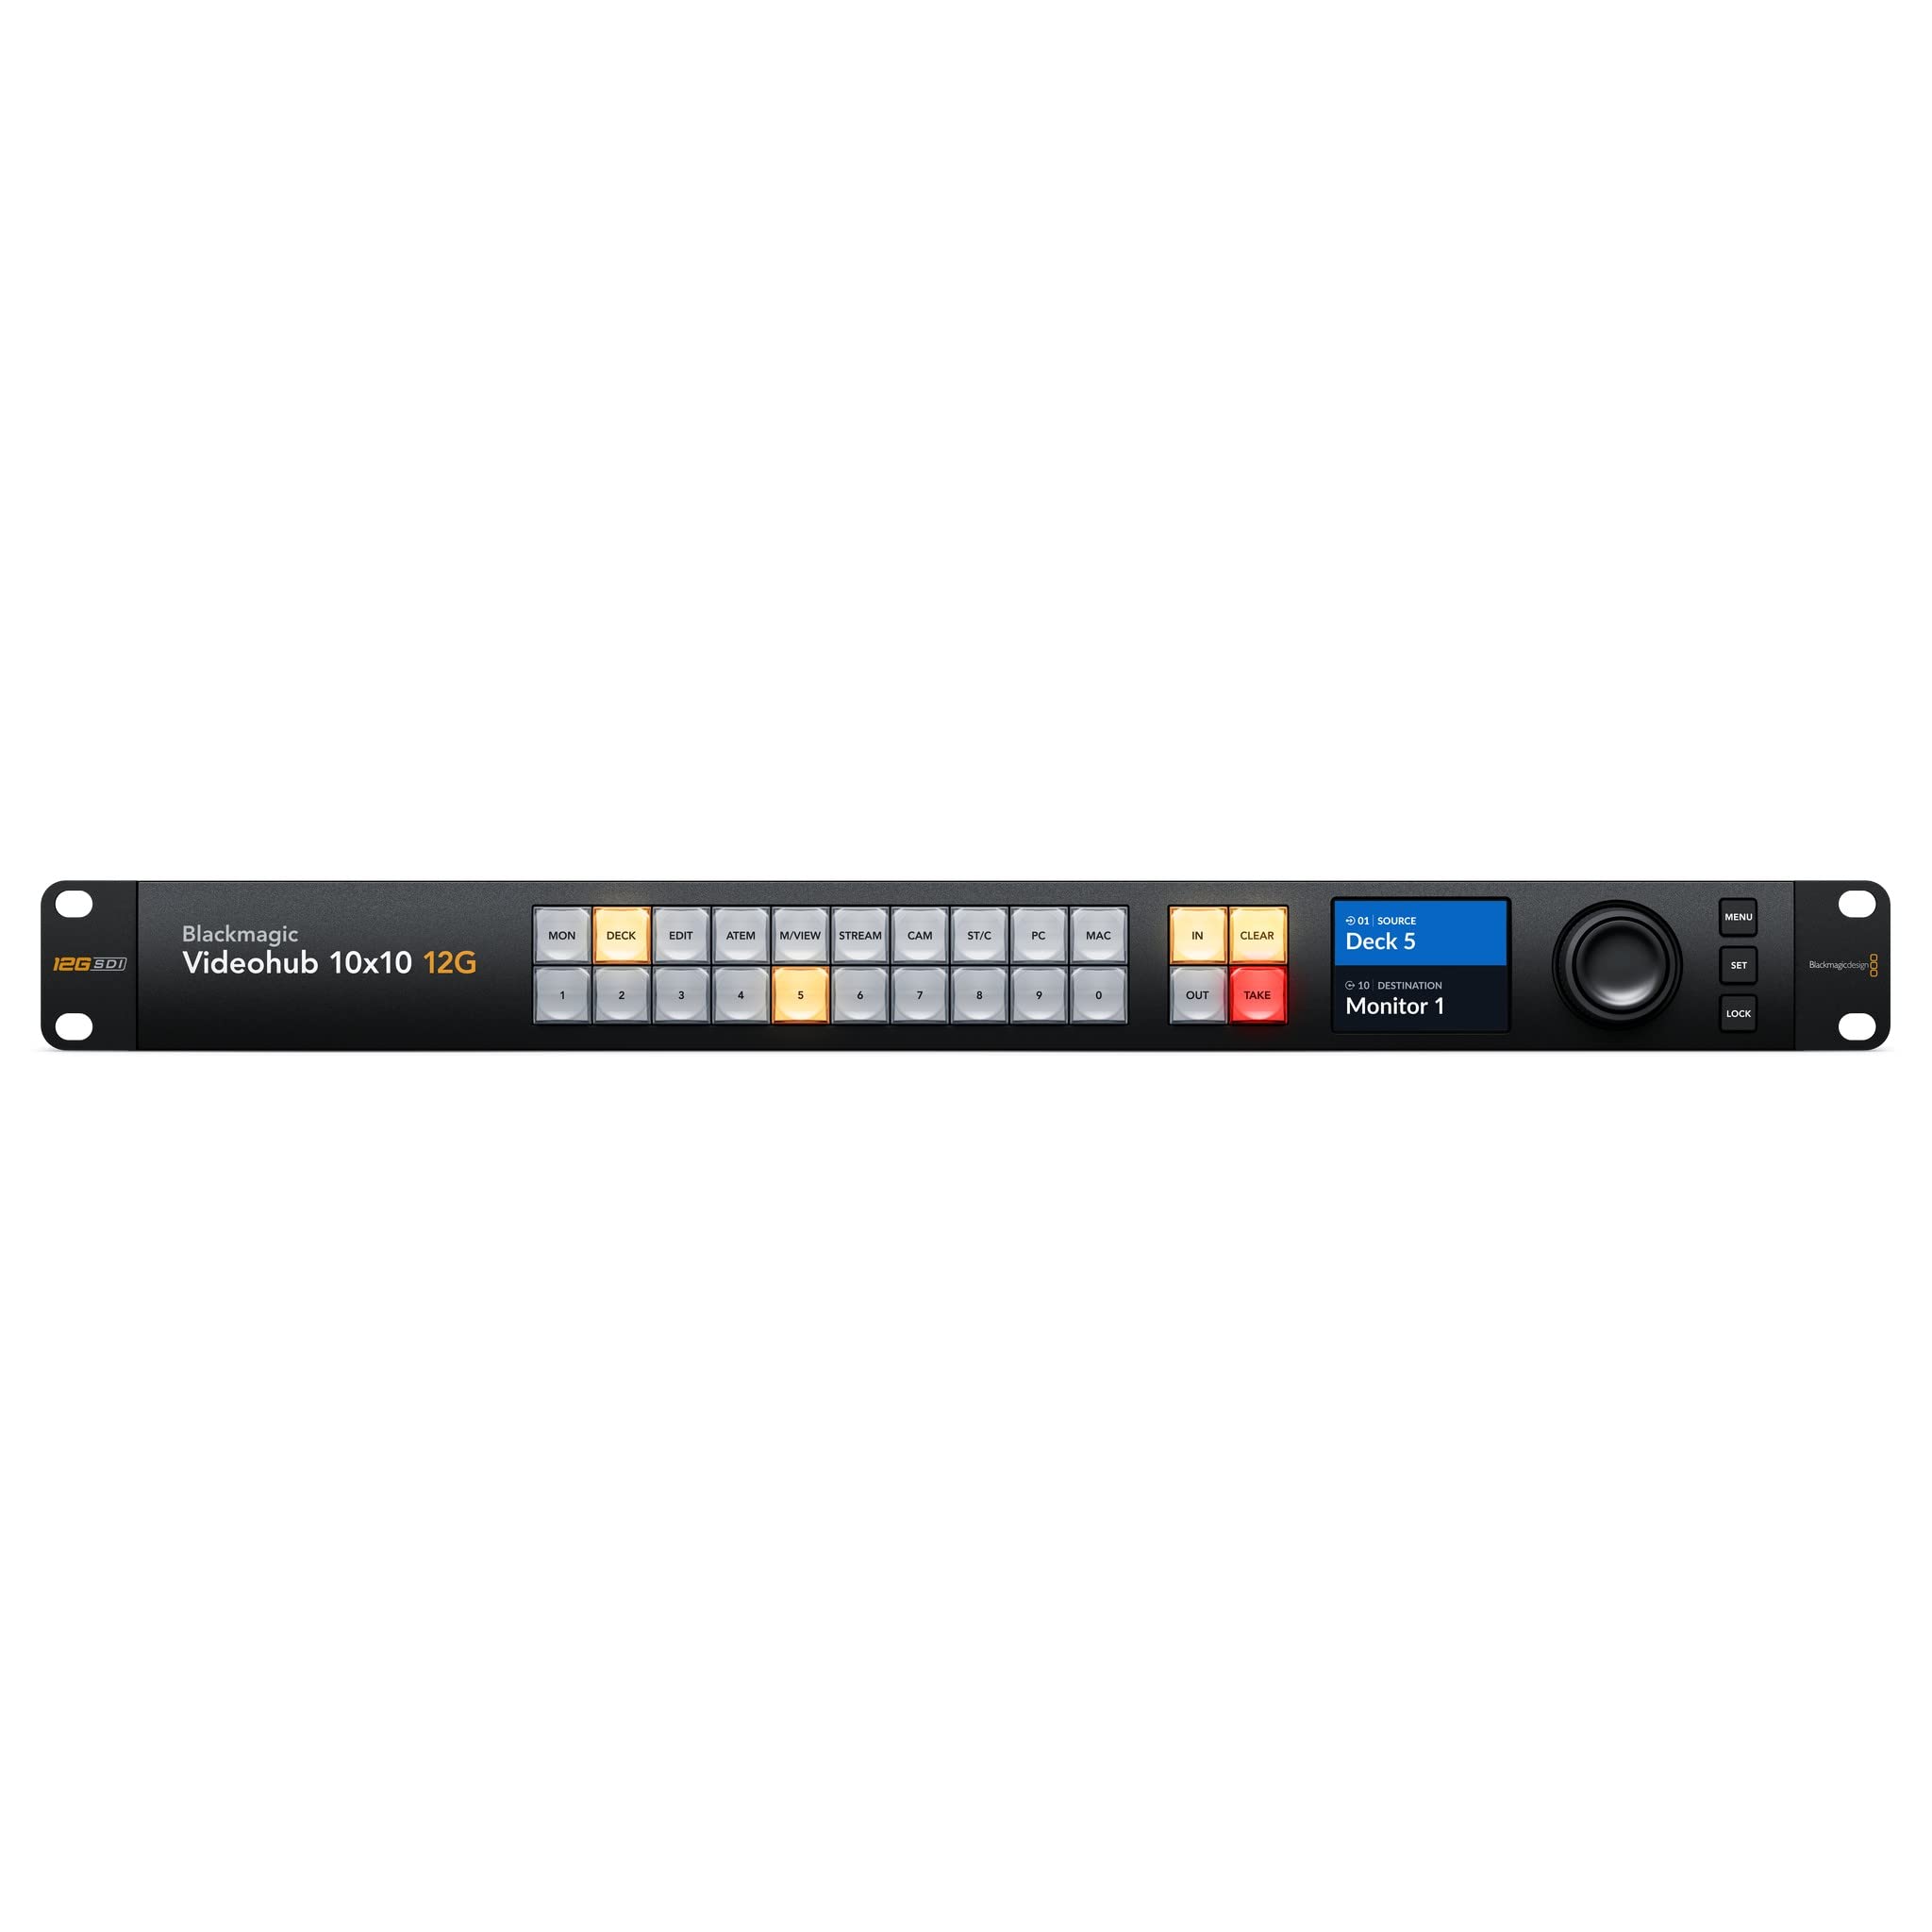 Blackmagic Design Videohub 12G Router, 10 Inputs and 10 Outputs